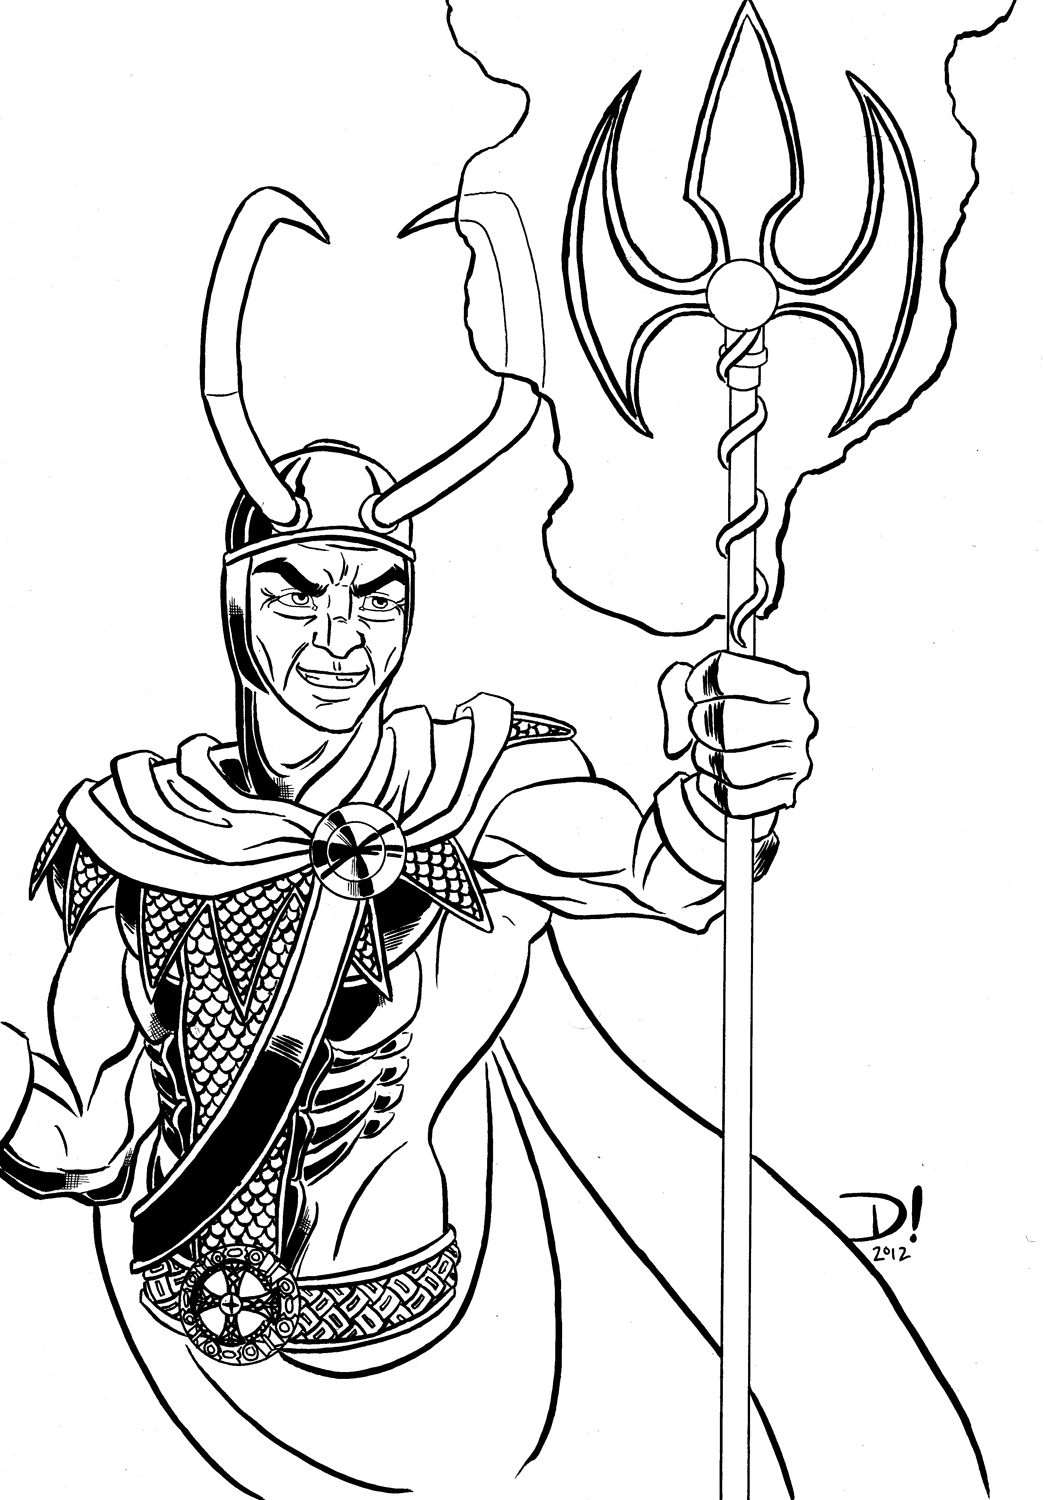 Rendering With Pen And Ink Robert Gill Pdf39 loki_inks_by_spidertour02-d4mq2jf